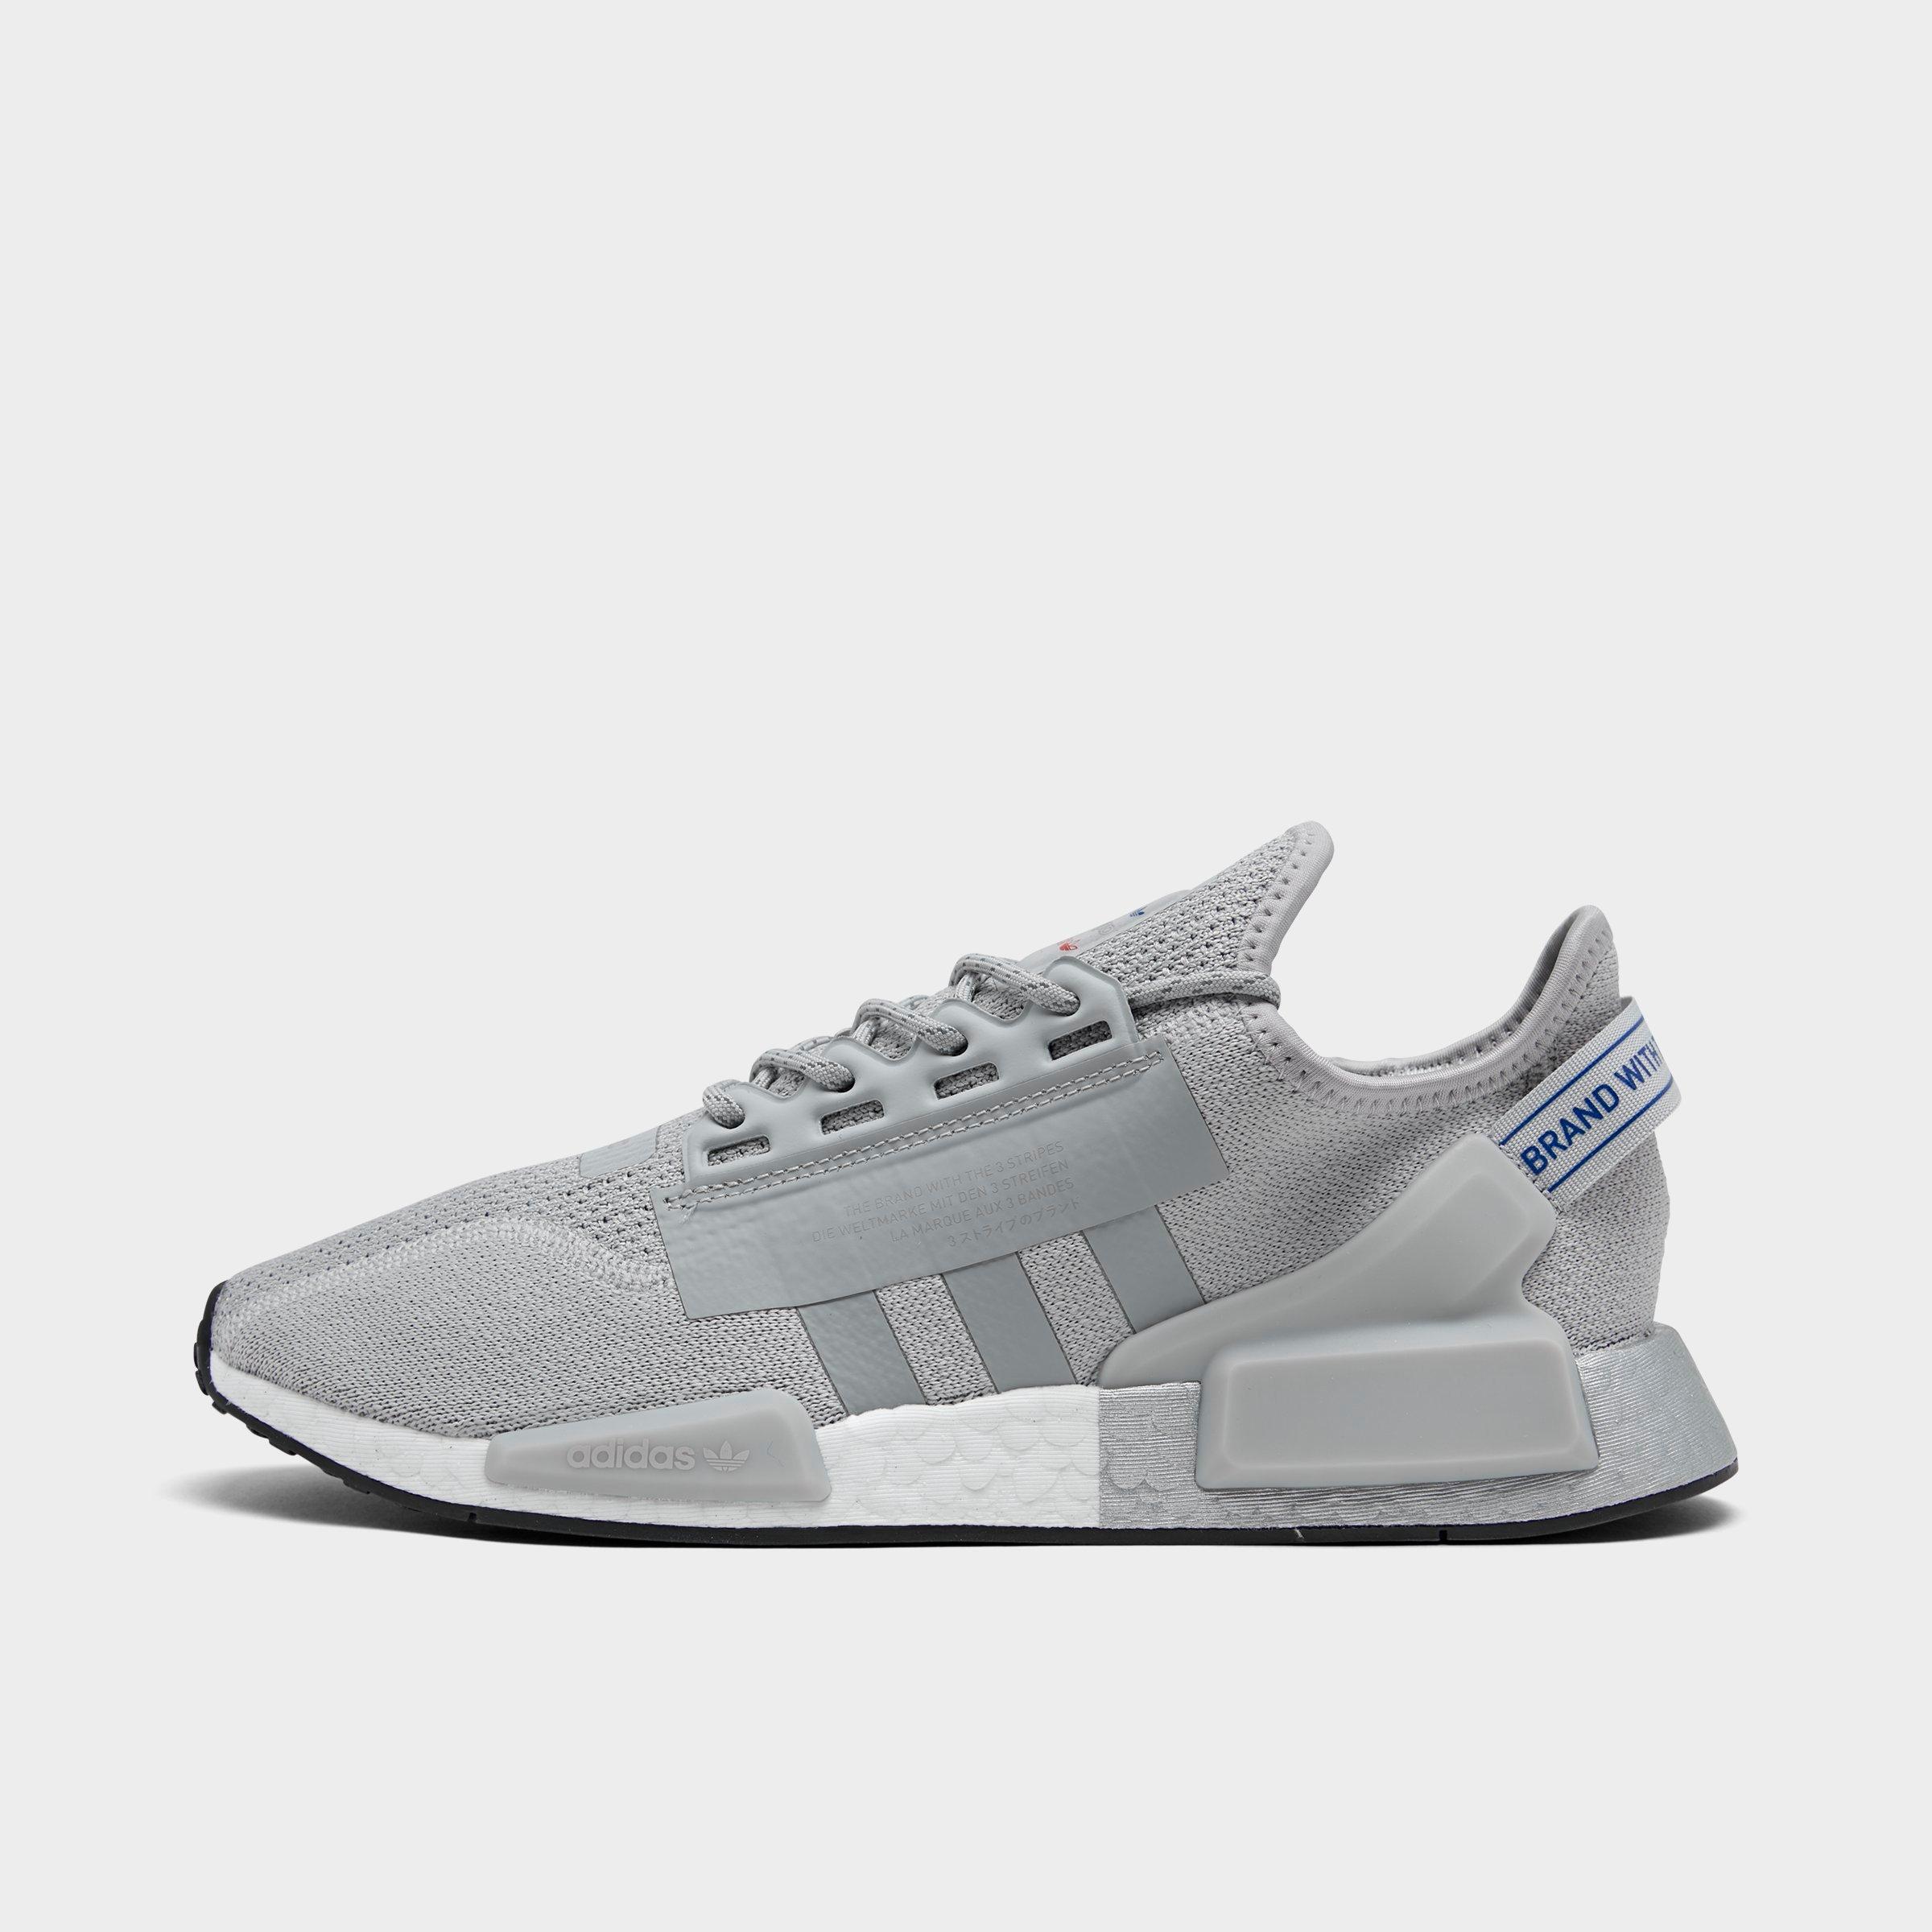 Adidas NMD R1 Primeknit Japan Pack Official Images Triple White